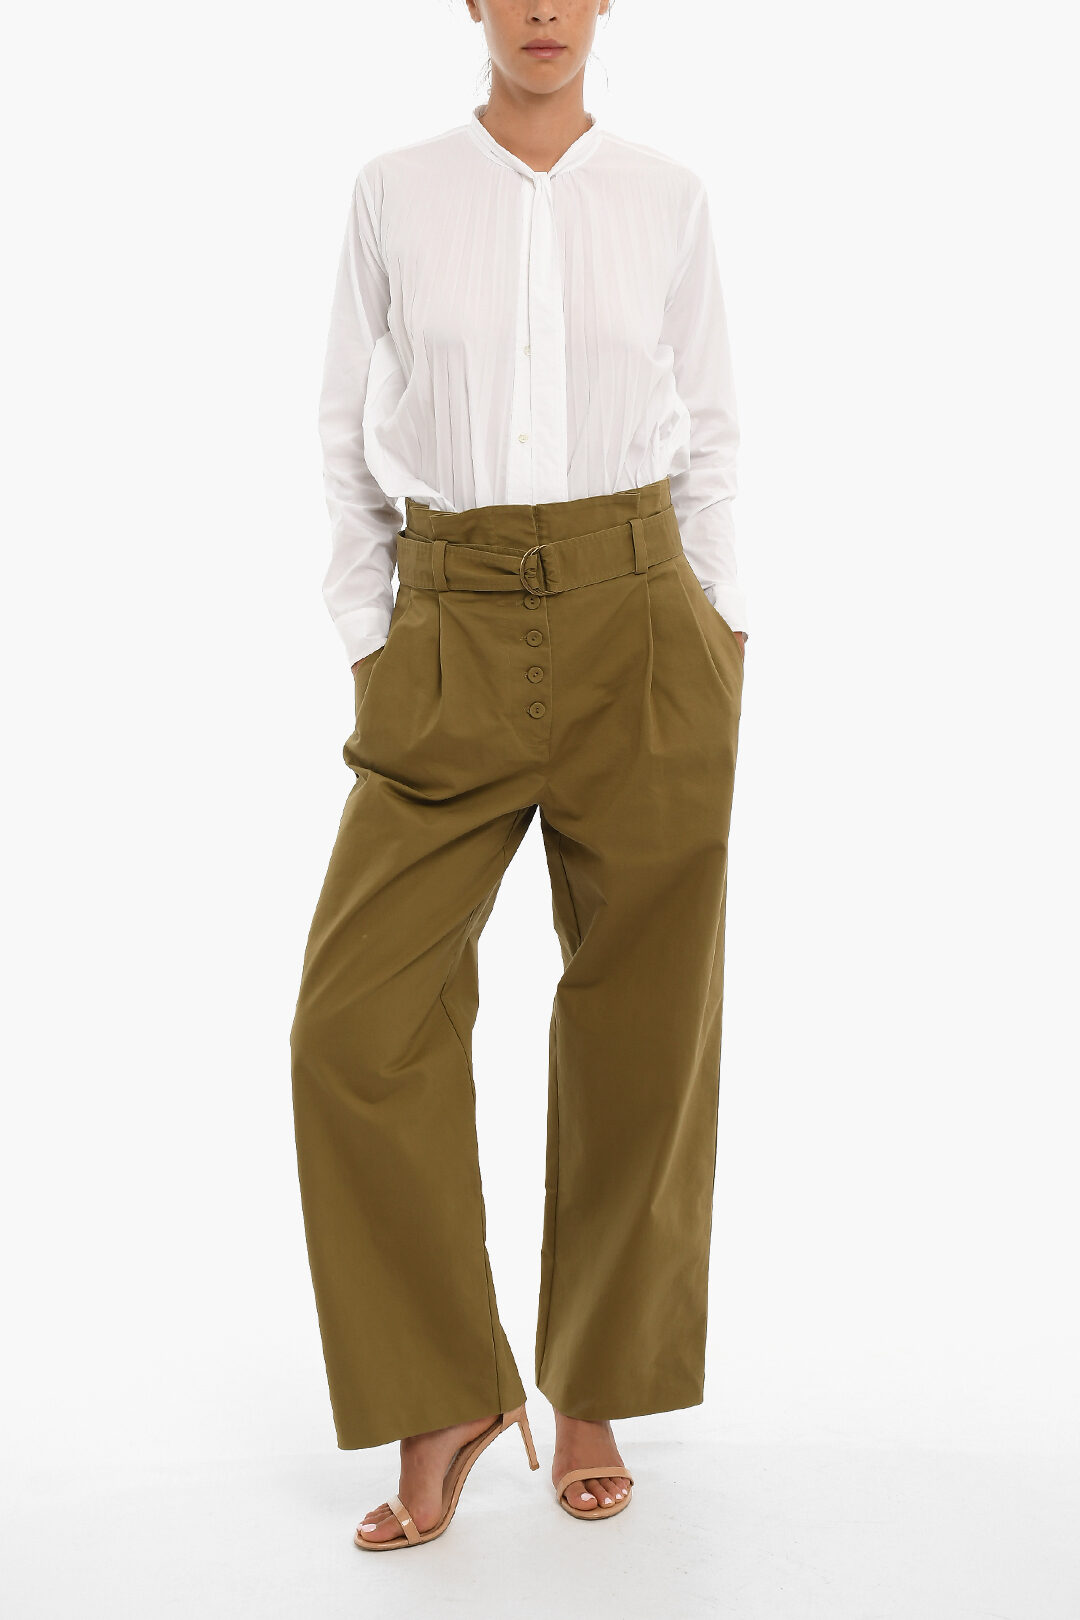 Ulla Johnson Belted High-waisted Wide Fit Pants women - Glamood Outlet